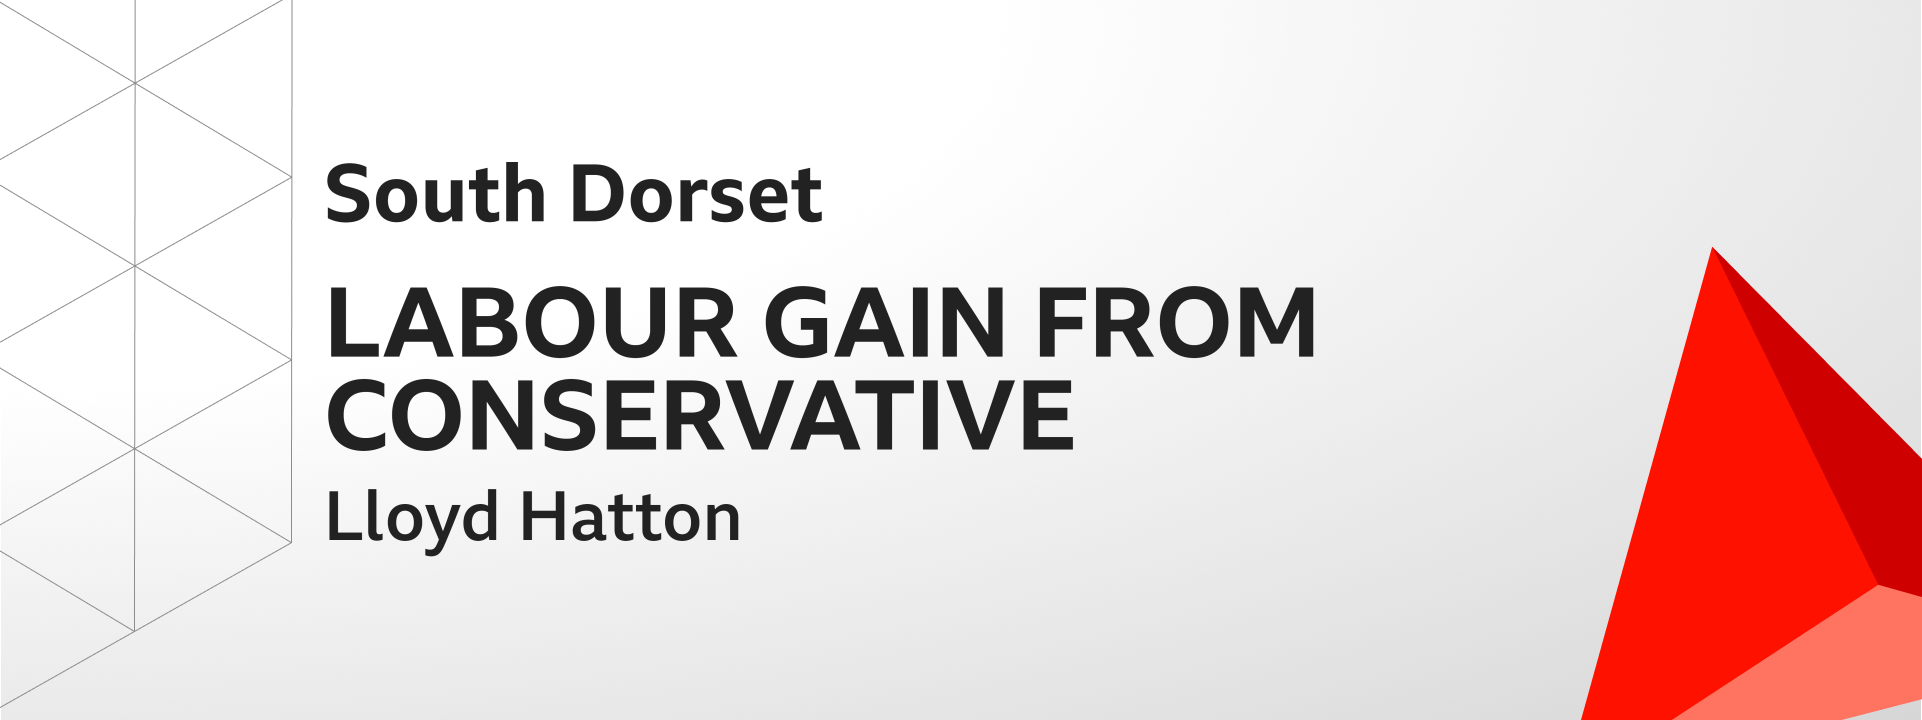 Graphic showing Labour gains South Dorset from the Conservatives. The winning candidate was Lloyd Hatton.